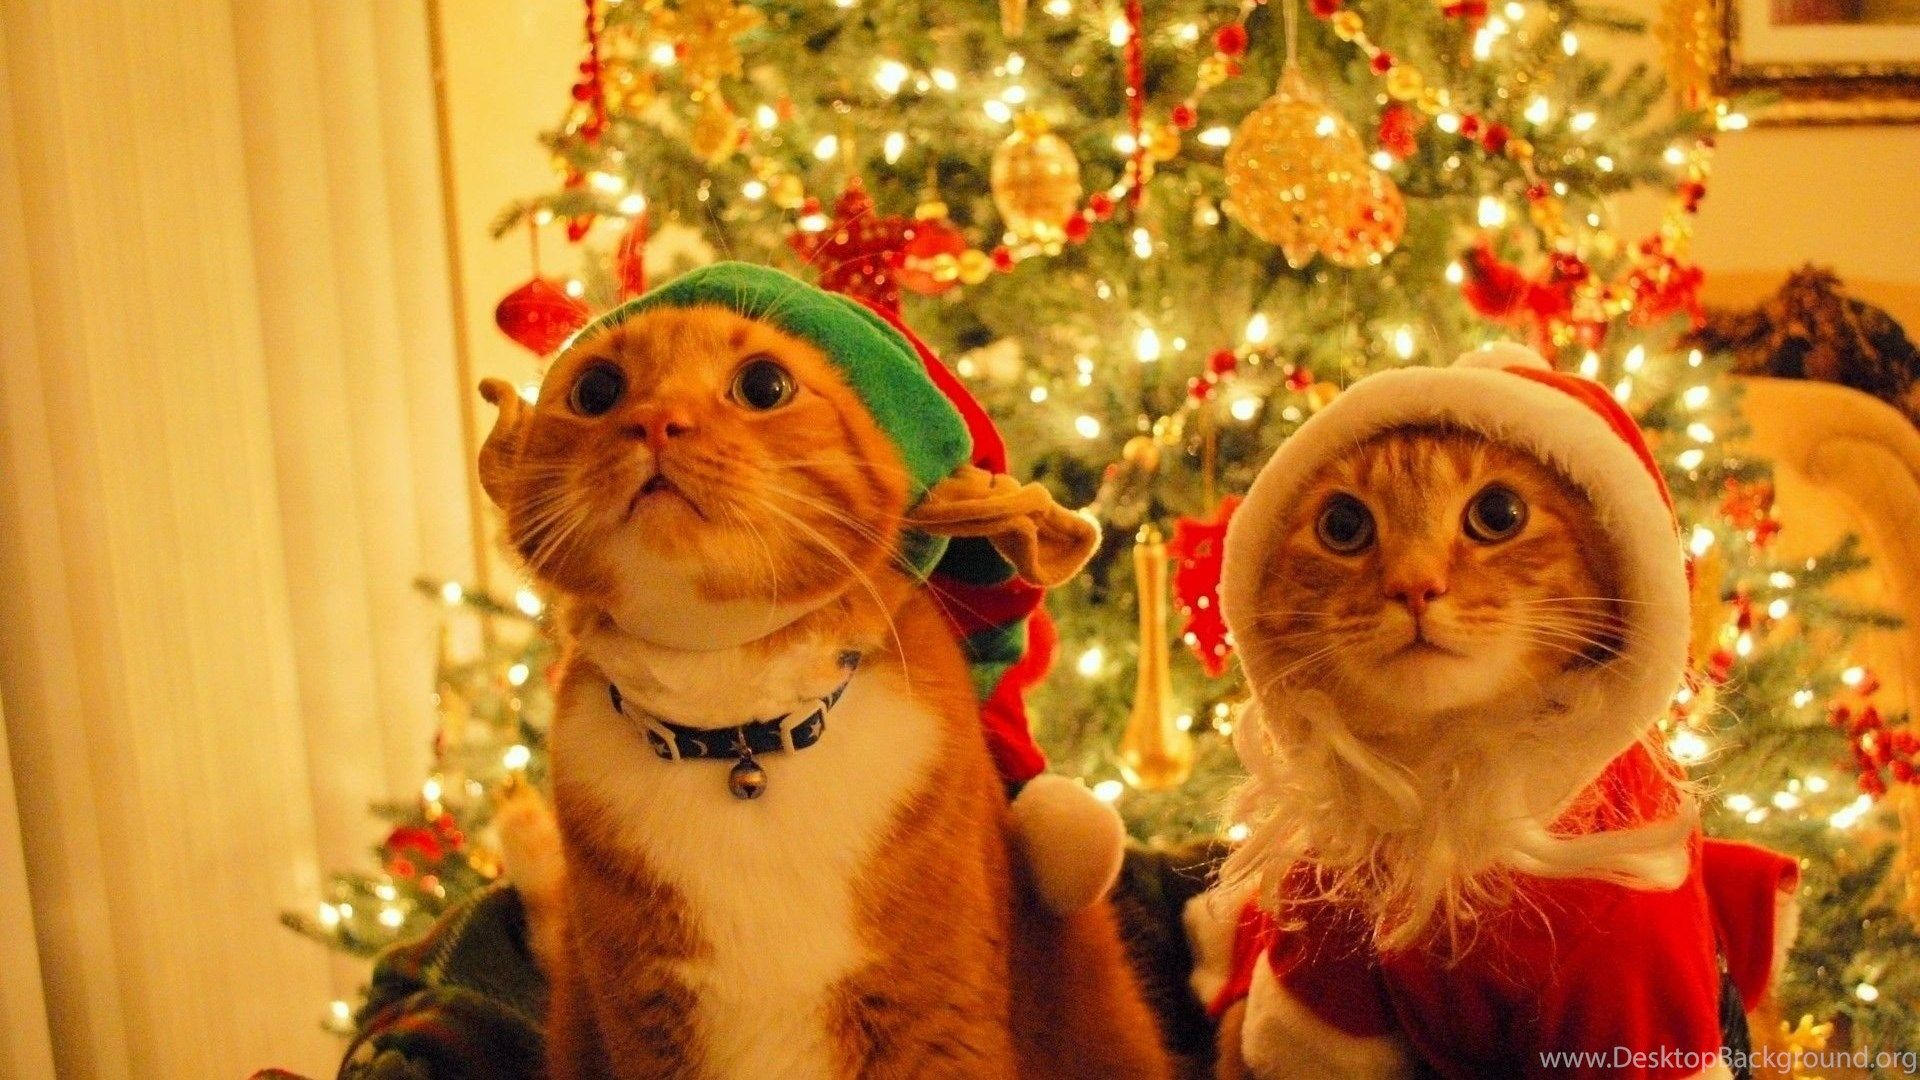 Two Cats Merry Christmas Wallpaper Free Downlo Desktop Background